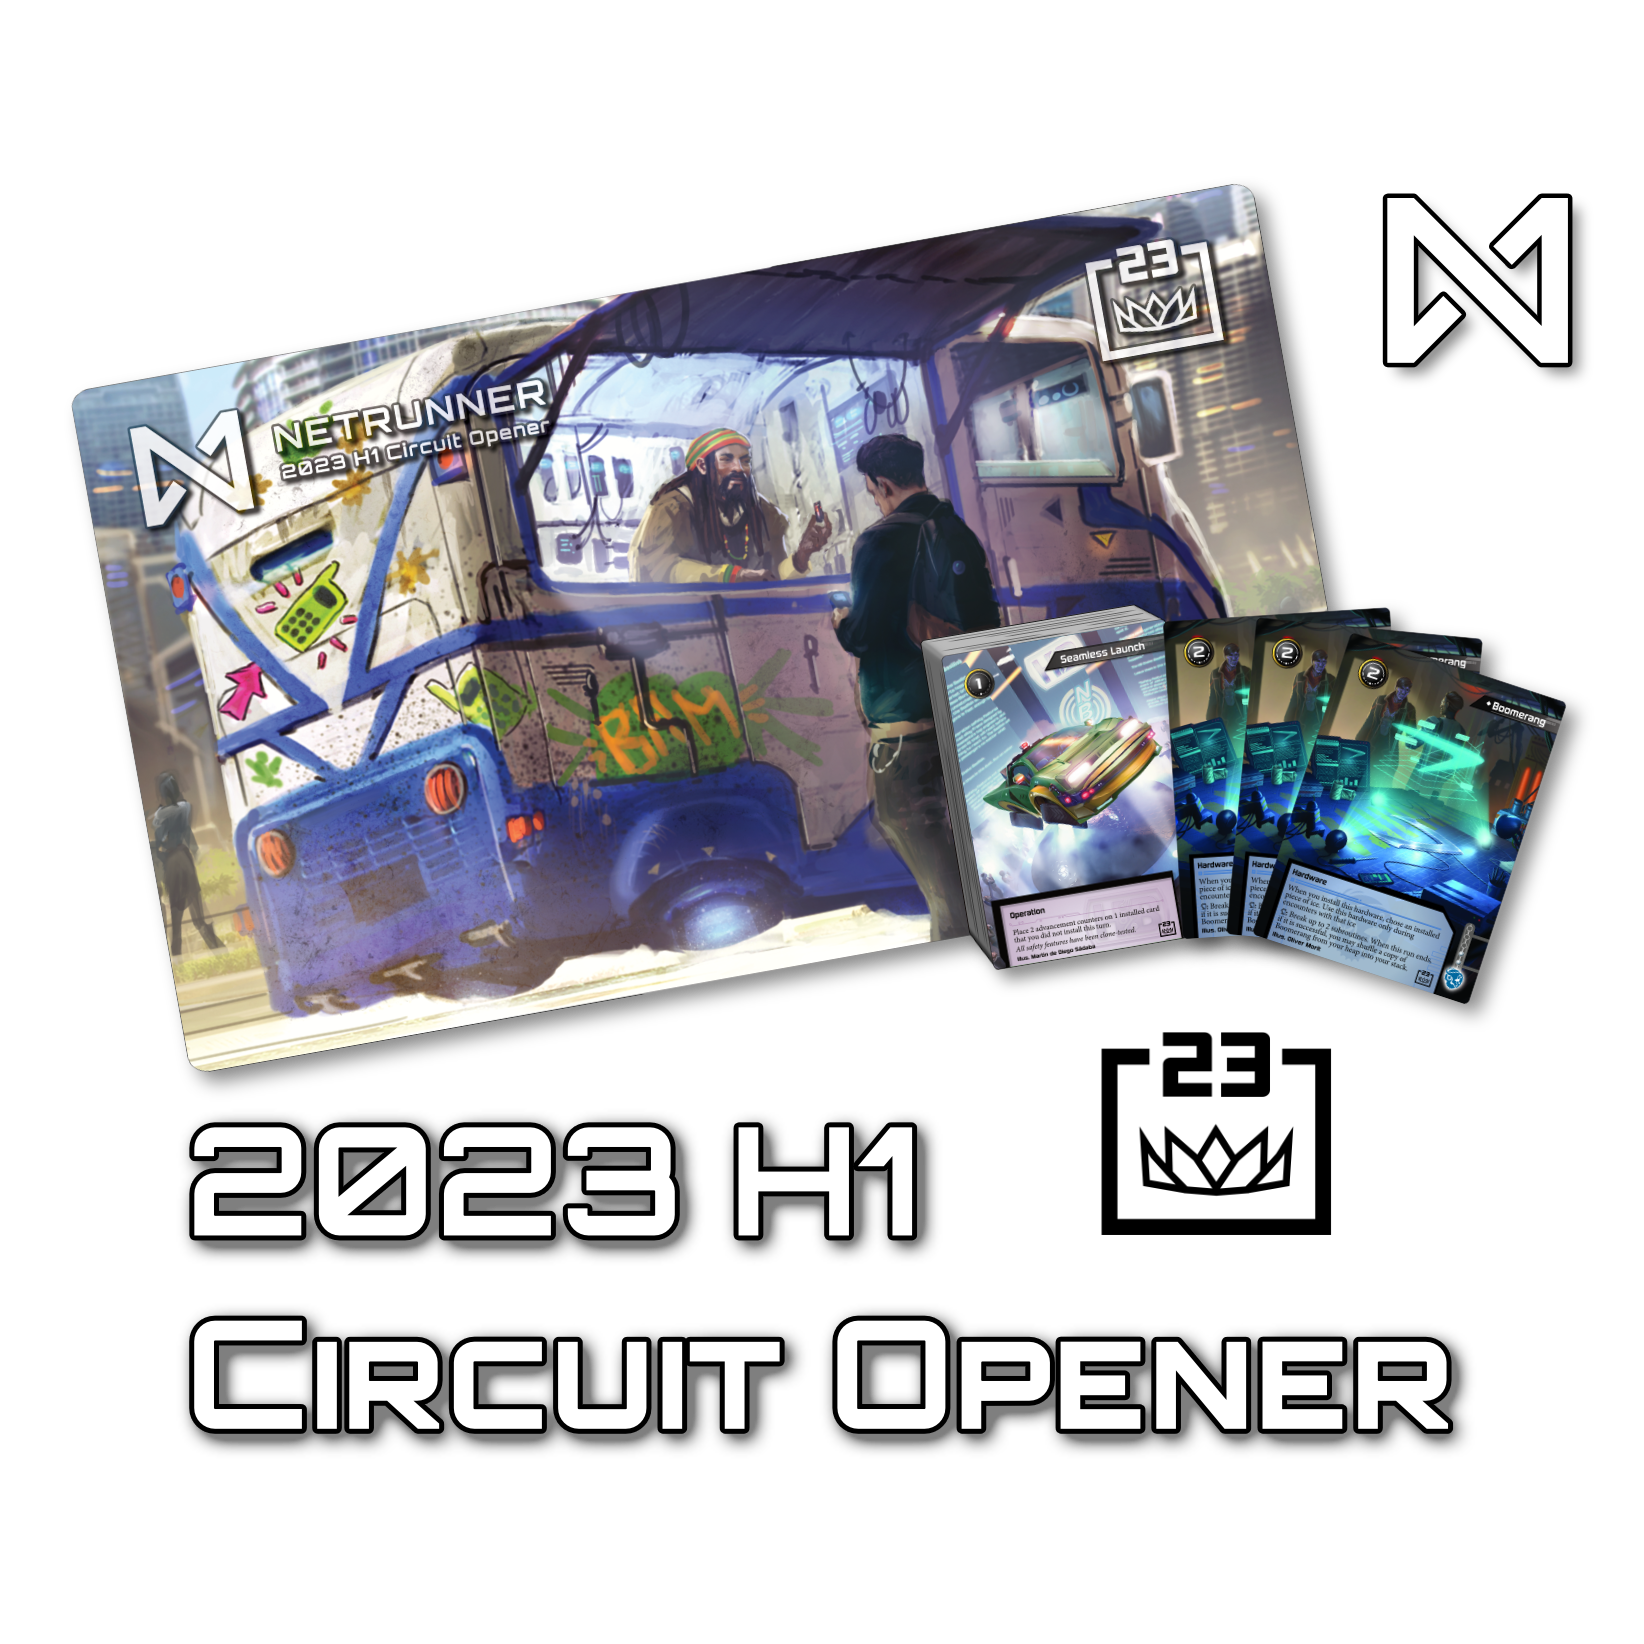 Announcing the 2023 H1 Circuit Opener